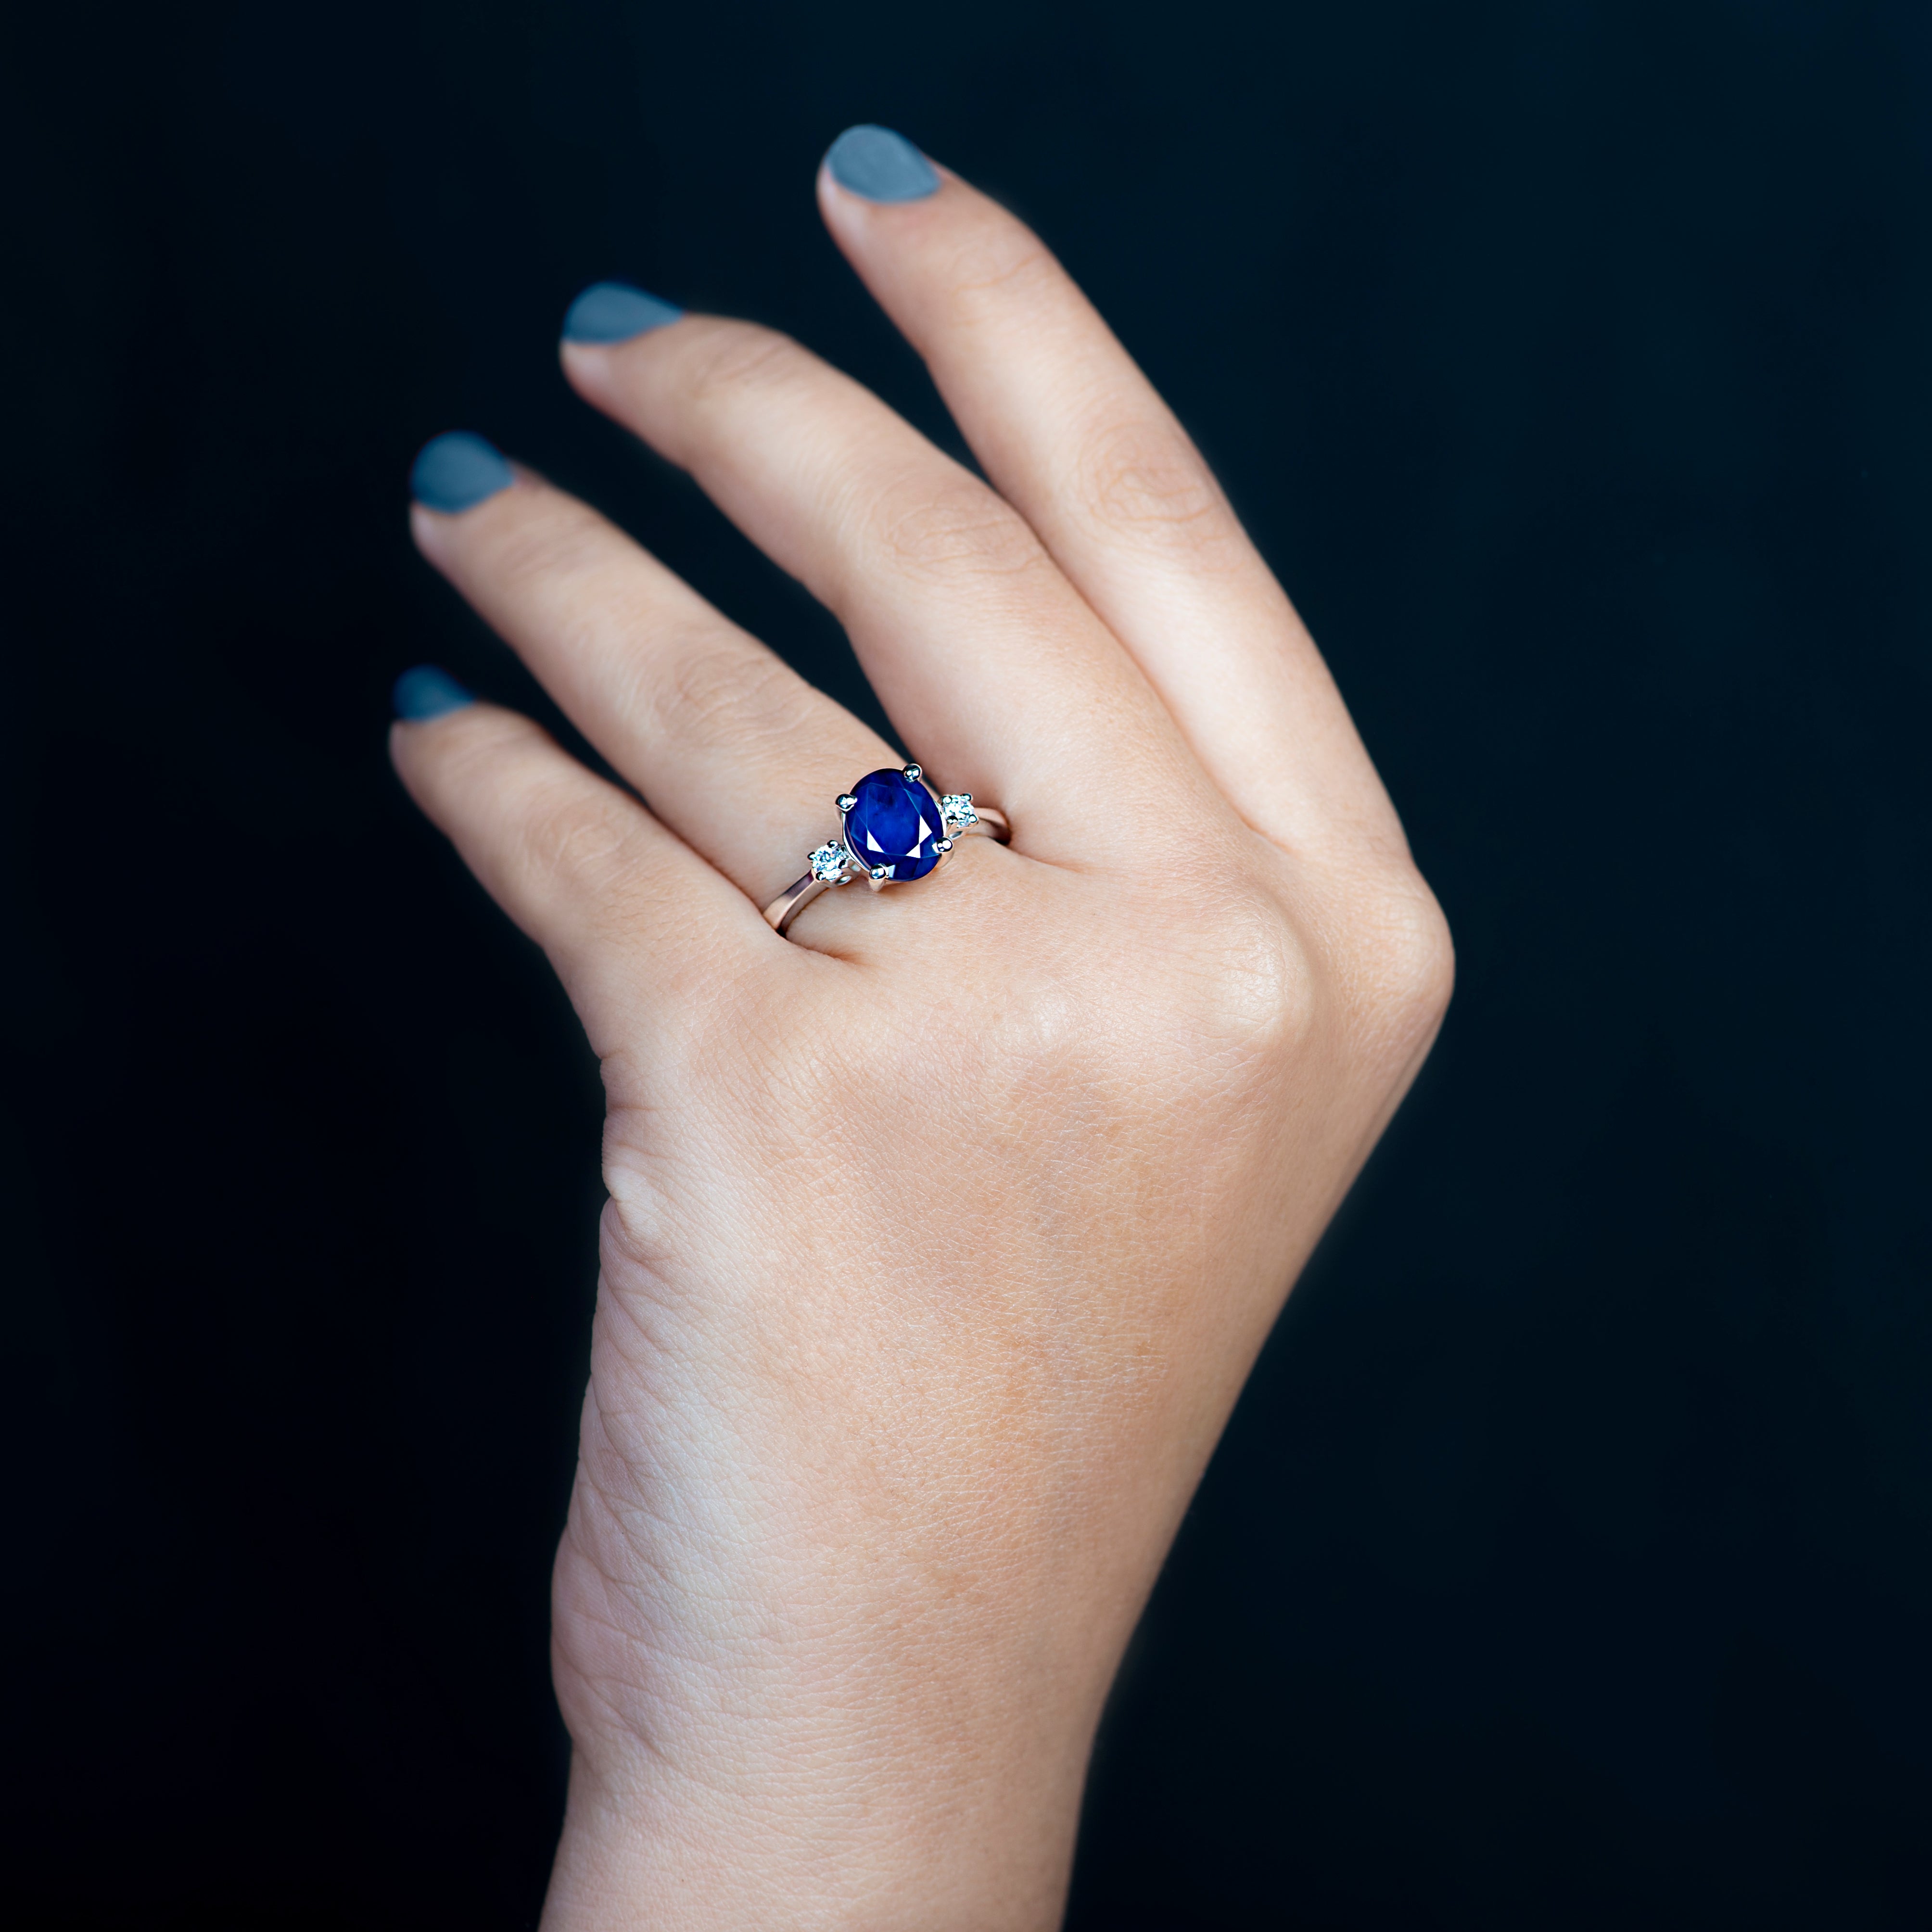 Natural Oval Shape gemstone Blue Sapphire Ring